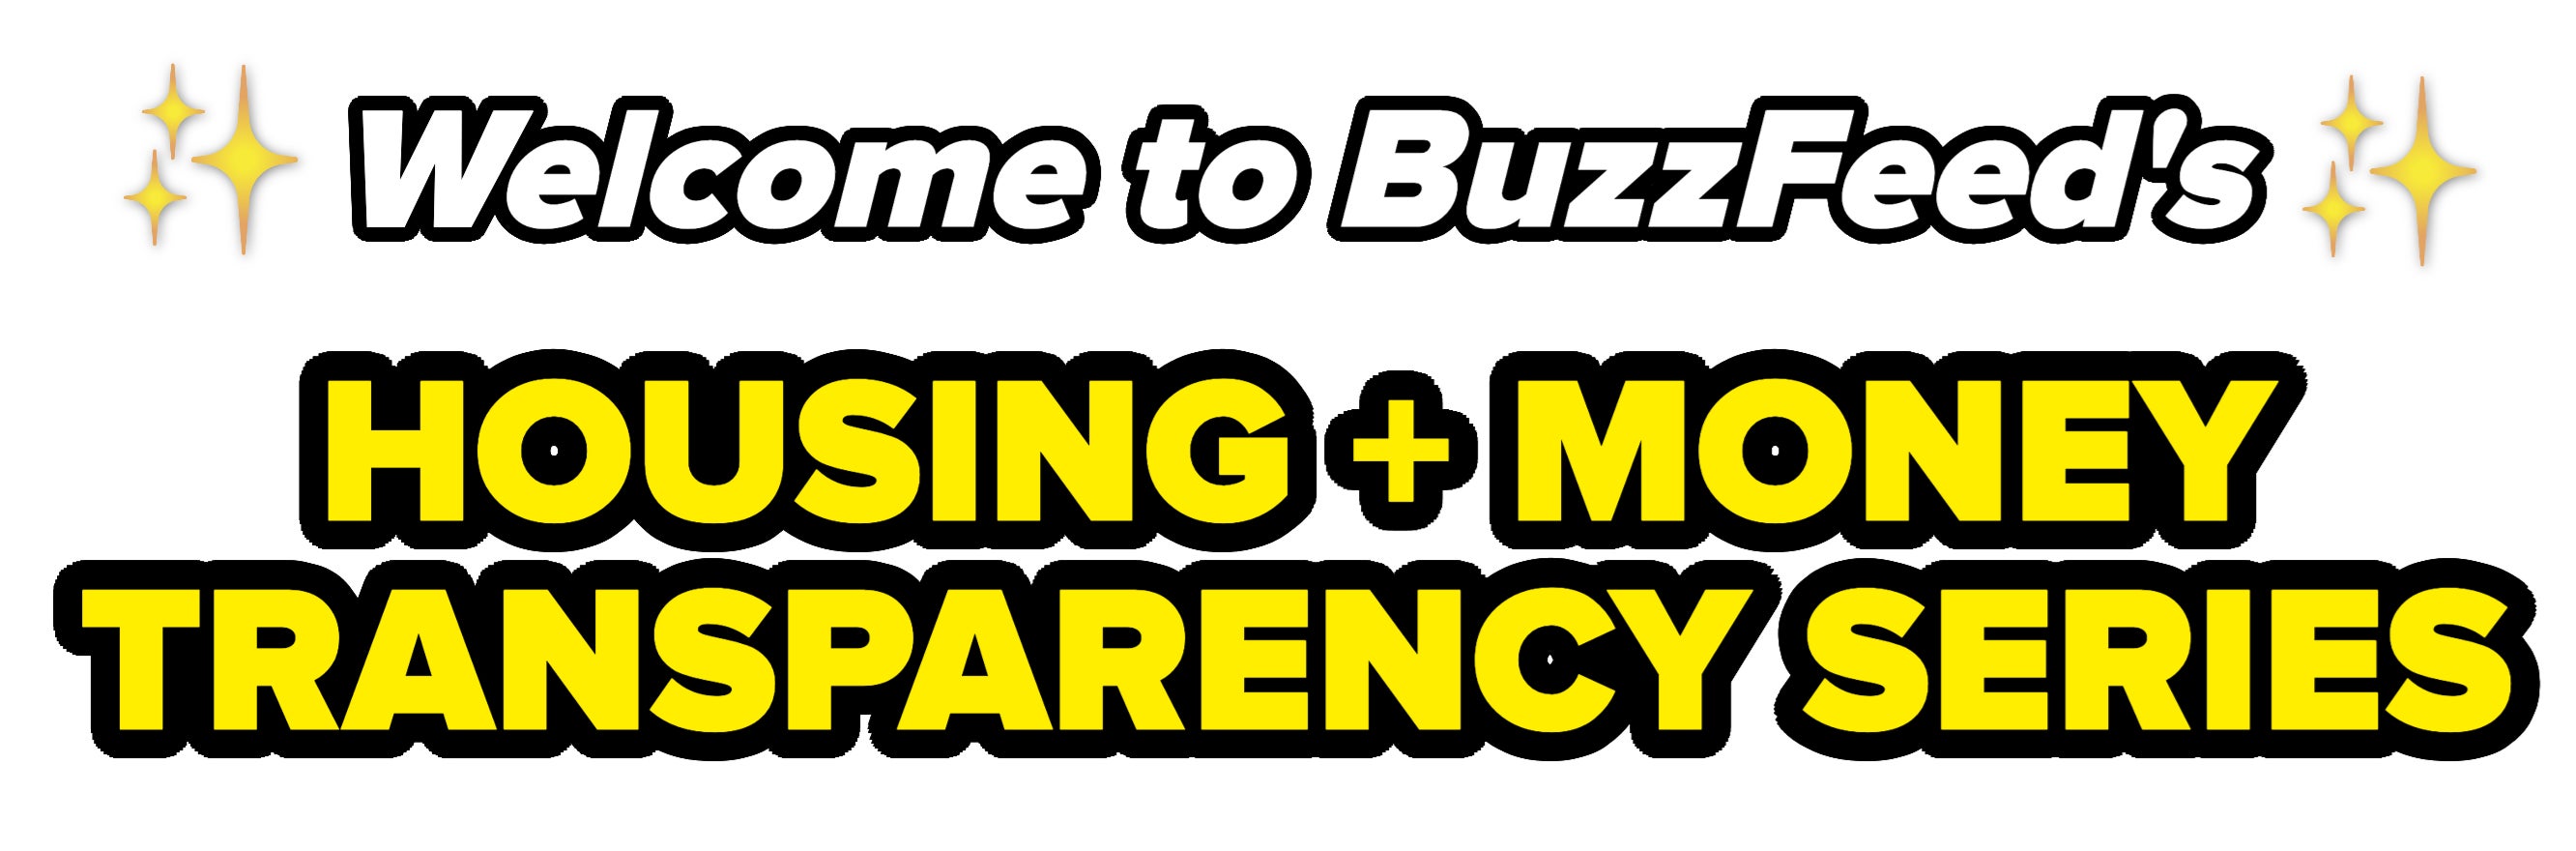 &quot;Welcome to BuzzFeed&#x27;s Housing + Money Transparency Series&quot;